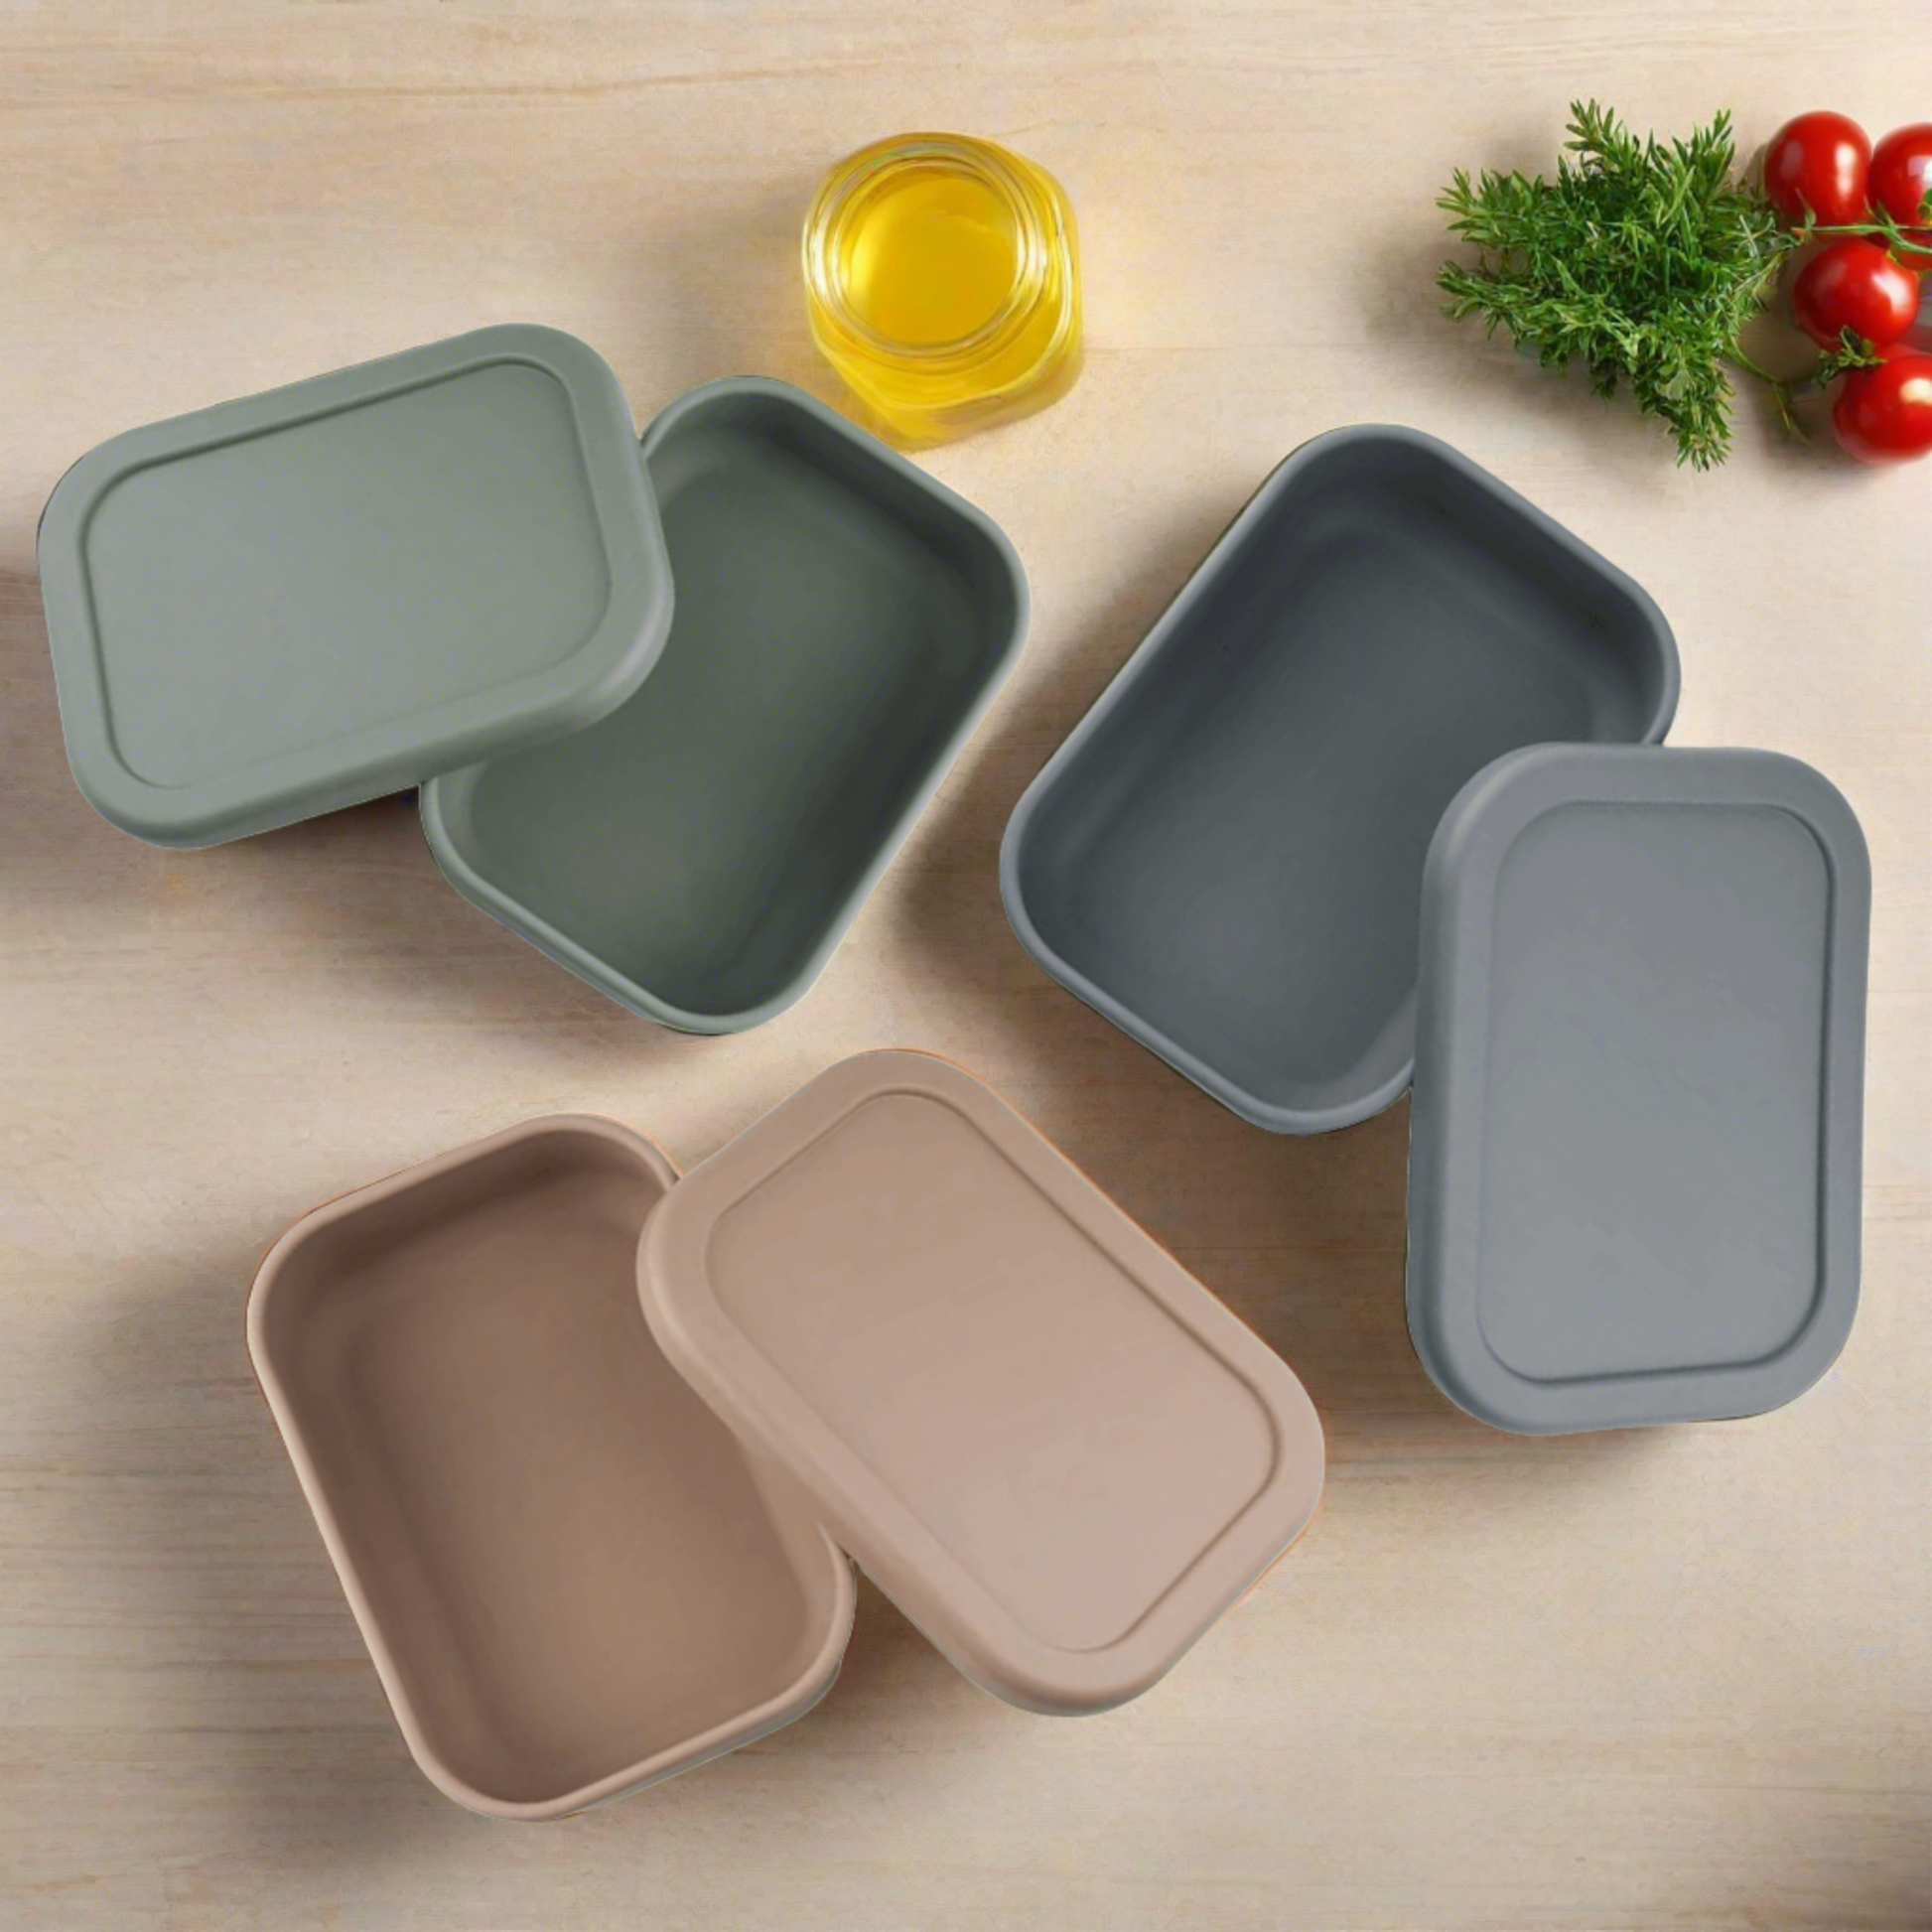 A full collection of Silicone Bento Lunch Boxes displayed in stylish sage green, modern grey, and cozy warm taupe colors, showcasing their unbreakable design, single compartment, and leak-proof lids perfect for kids' mealtime.